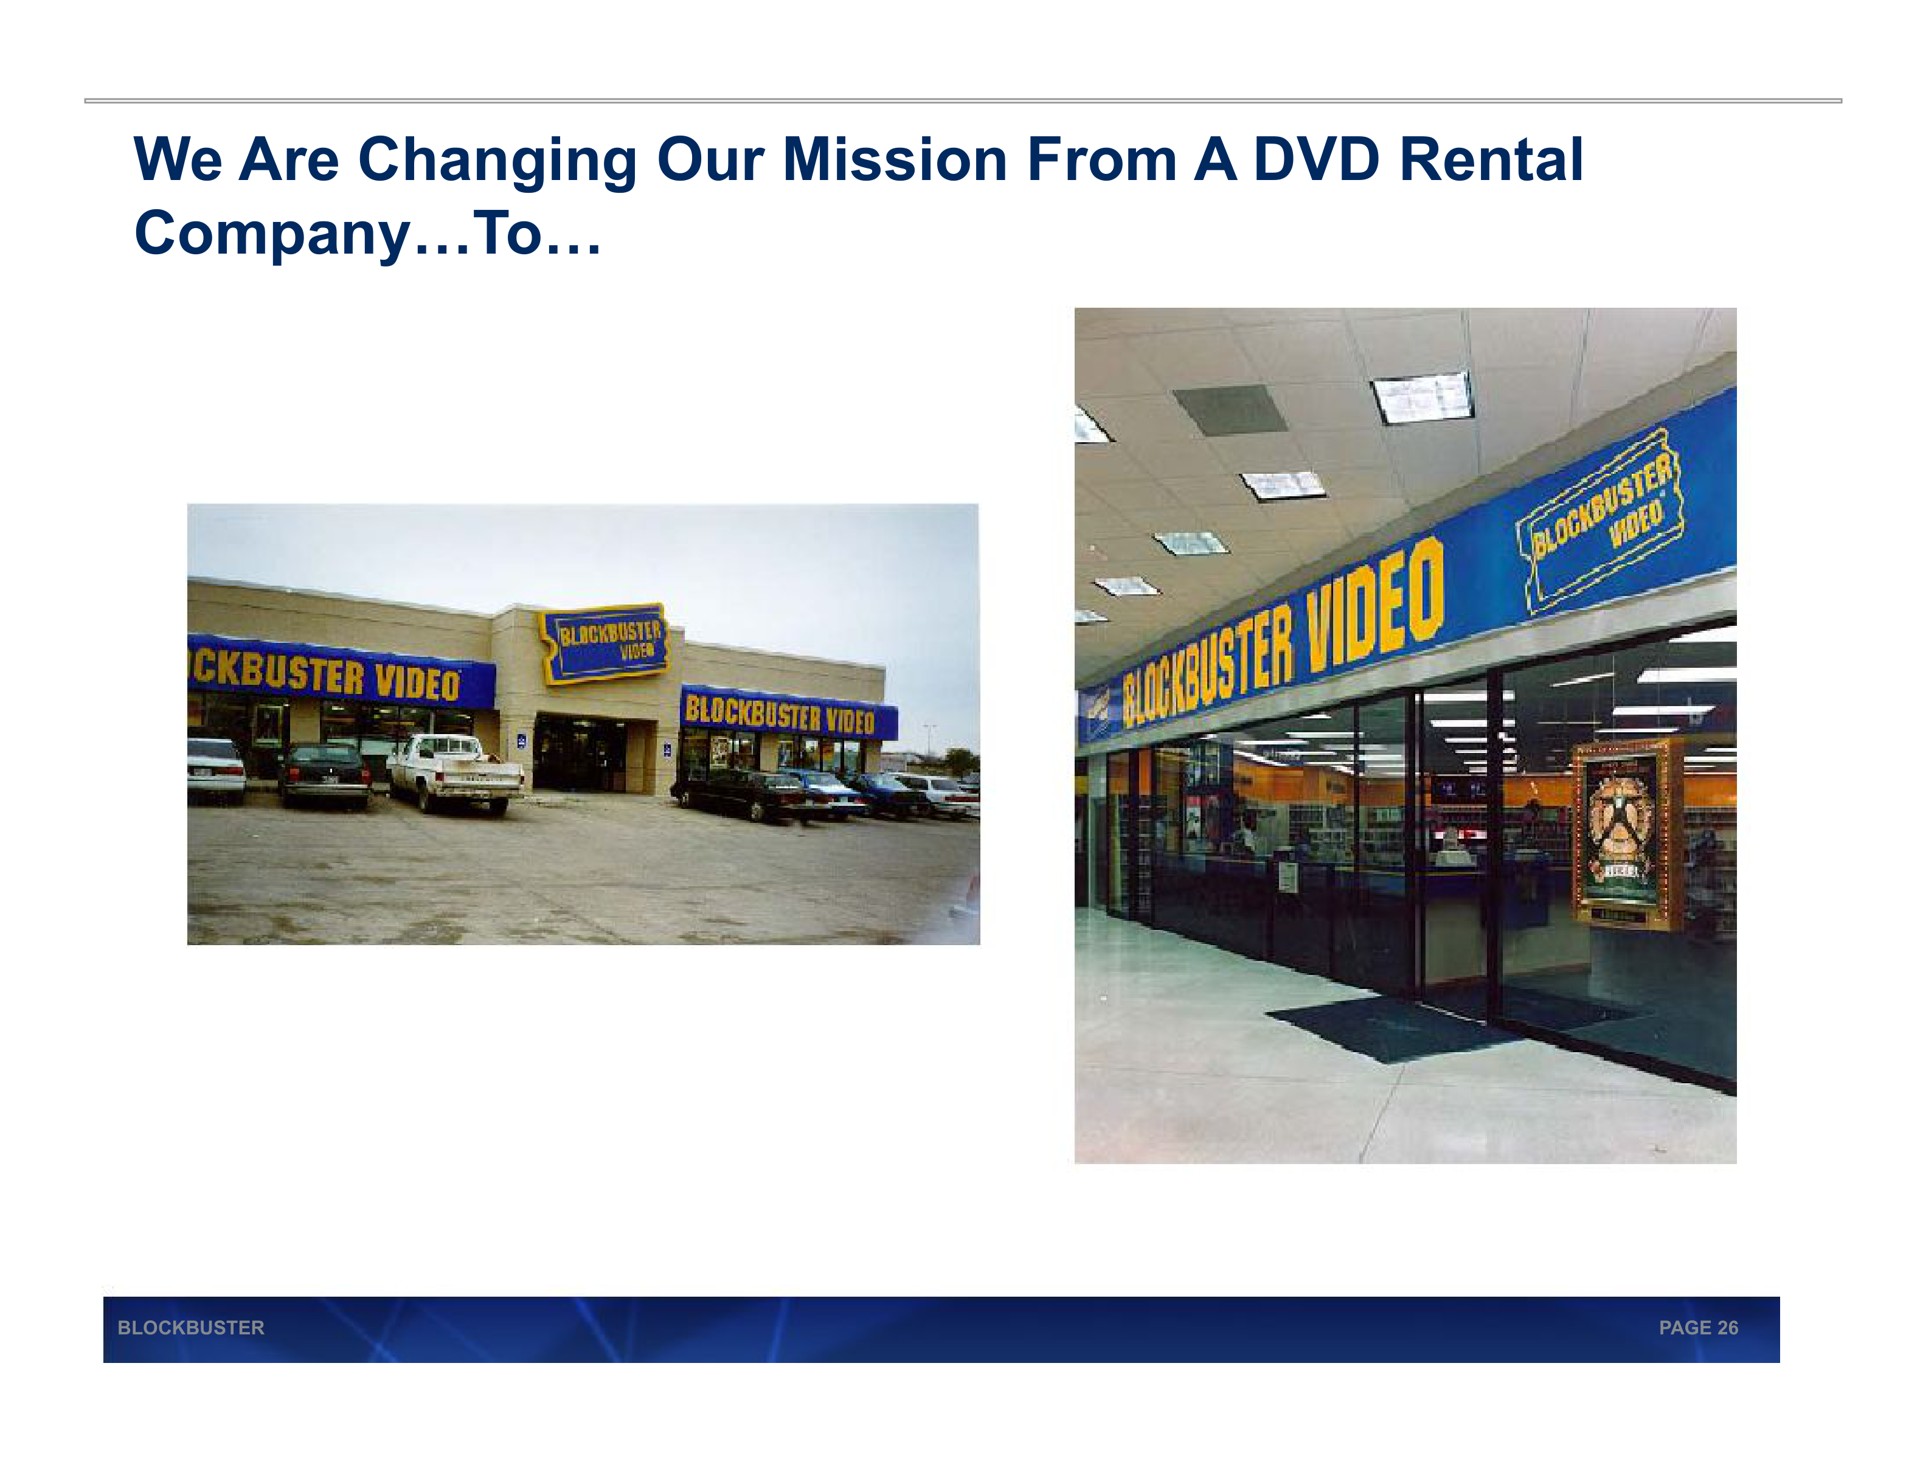 we are changing our mission from a rental company to | Blockbuster Video